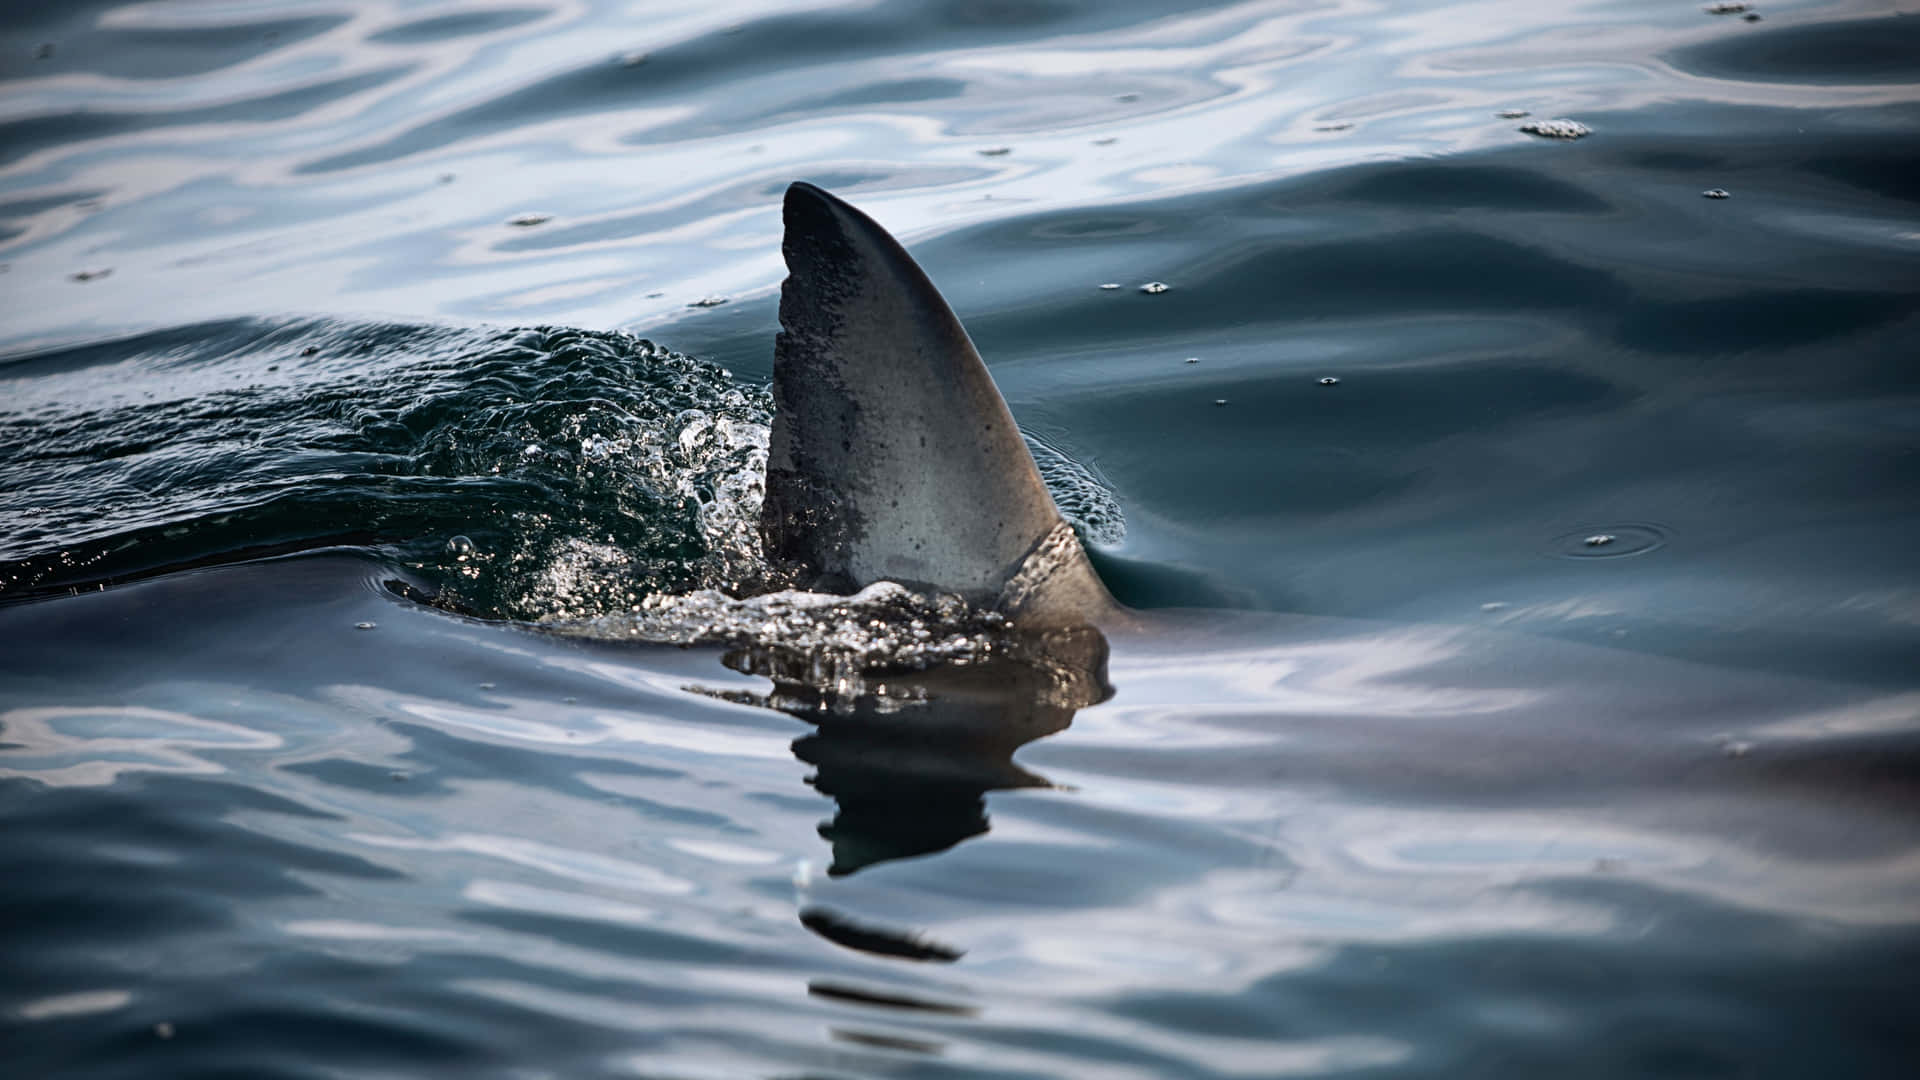 Beware of the Great White Shark--the largest known predatory fish in the ocean